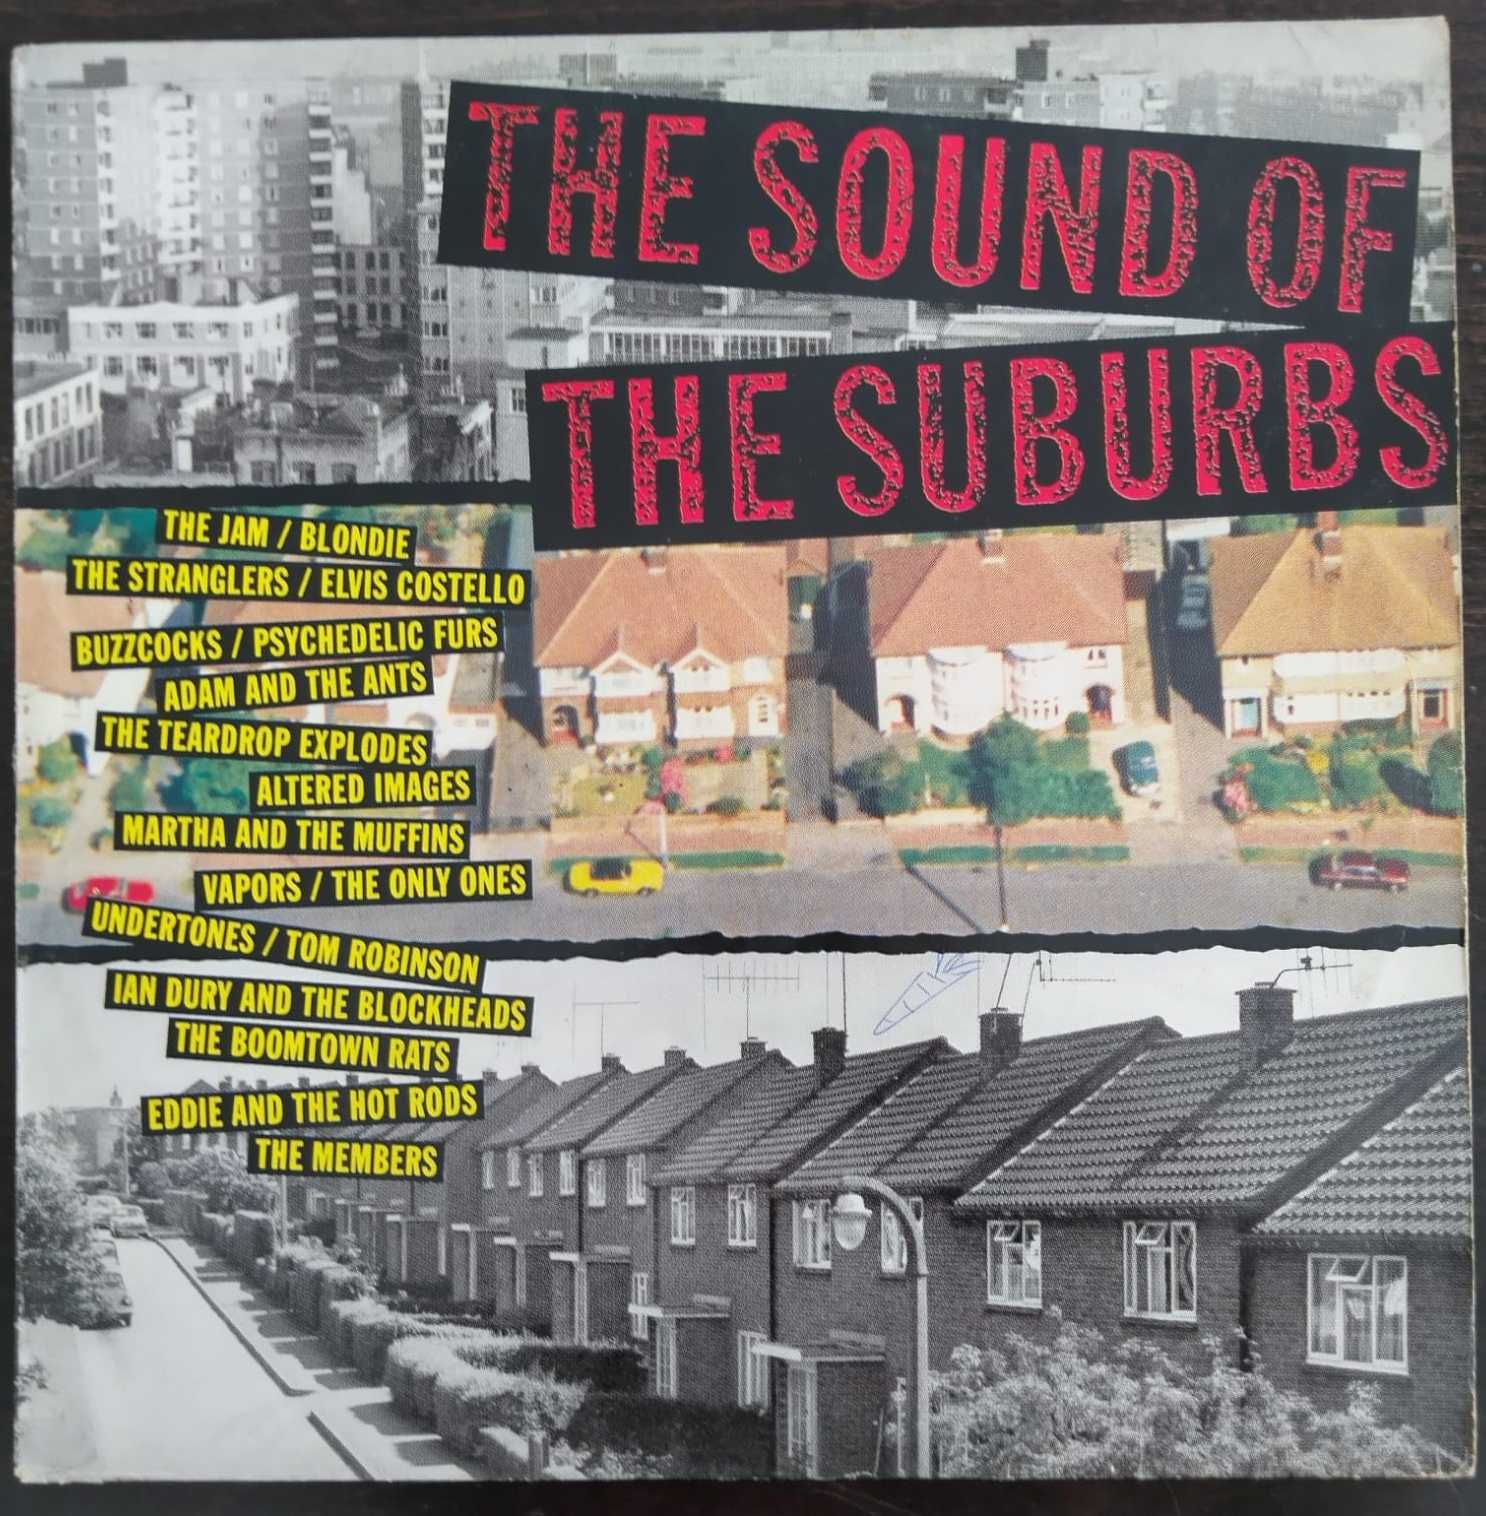 Vinil “The sound of the suburbs”. The Jam, Blondie, Elvis Costello...